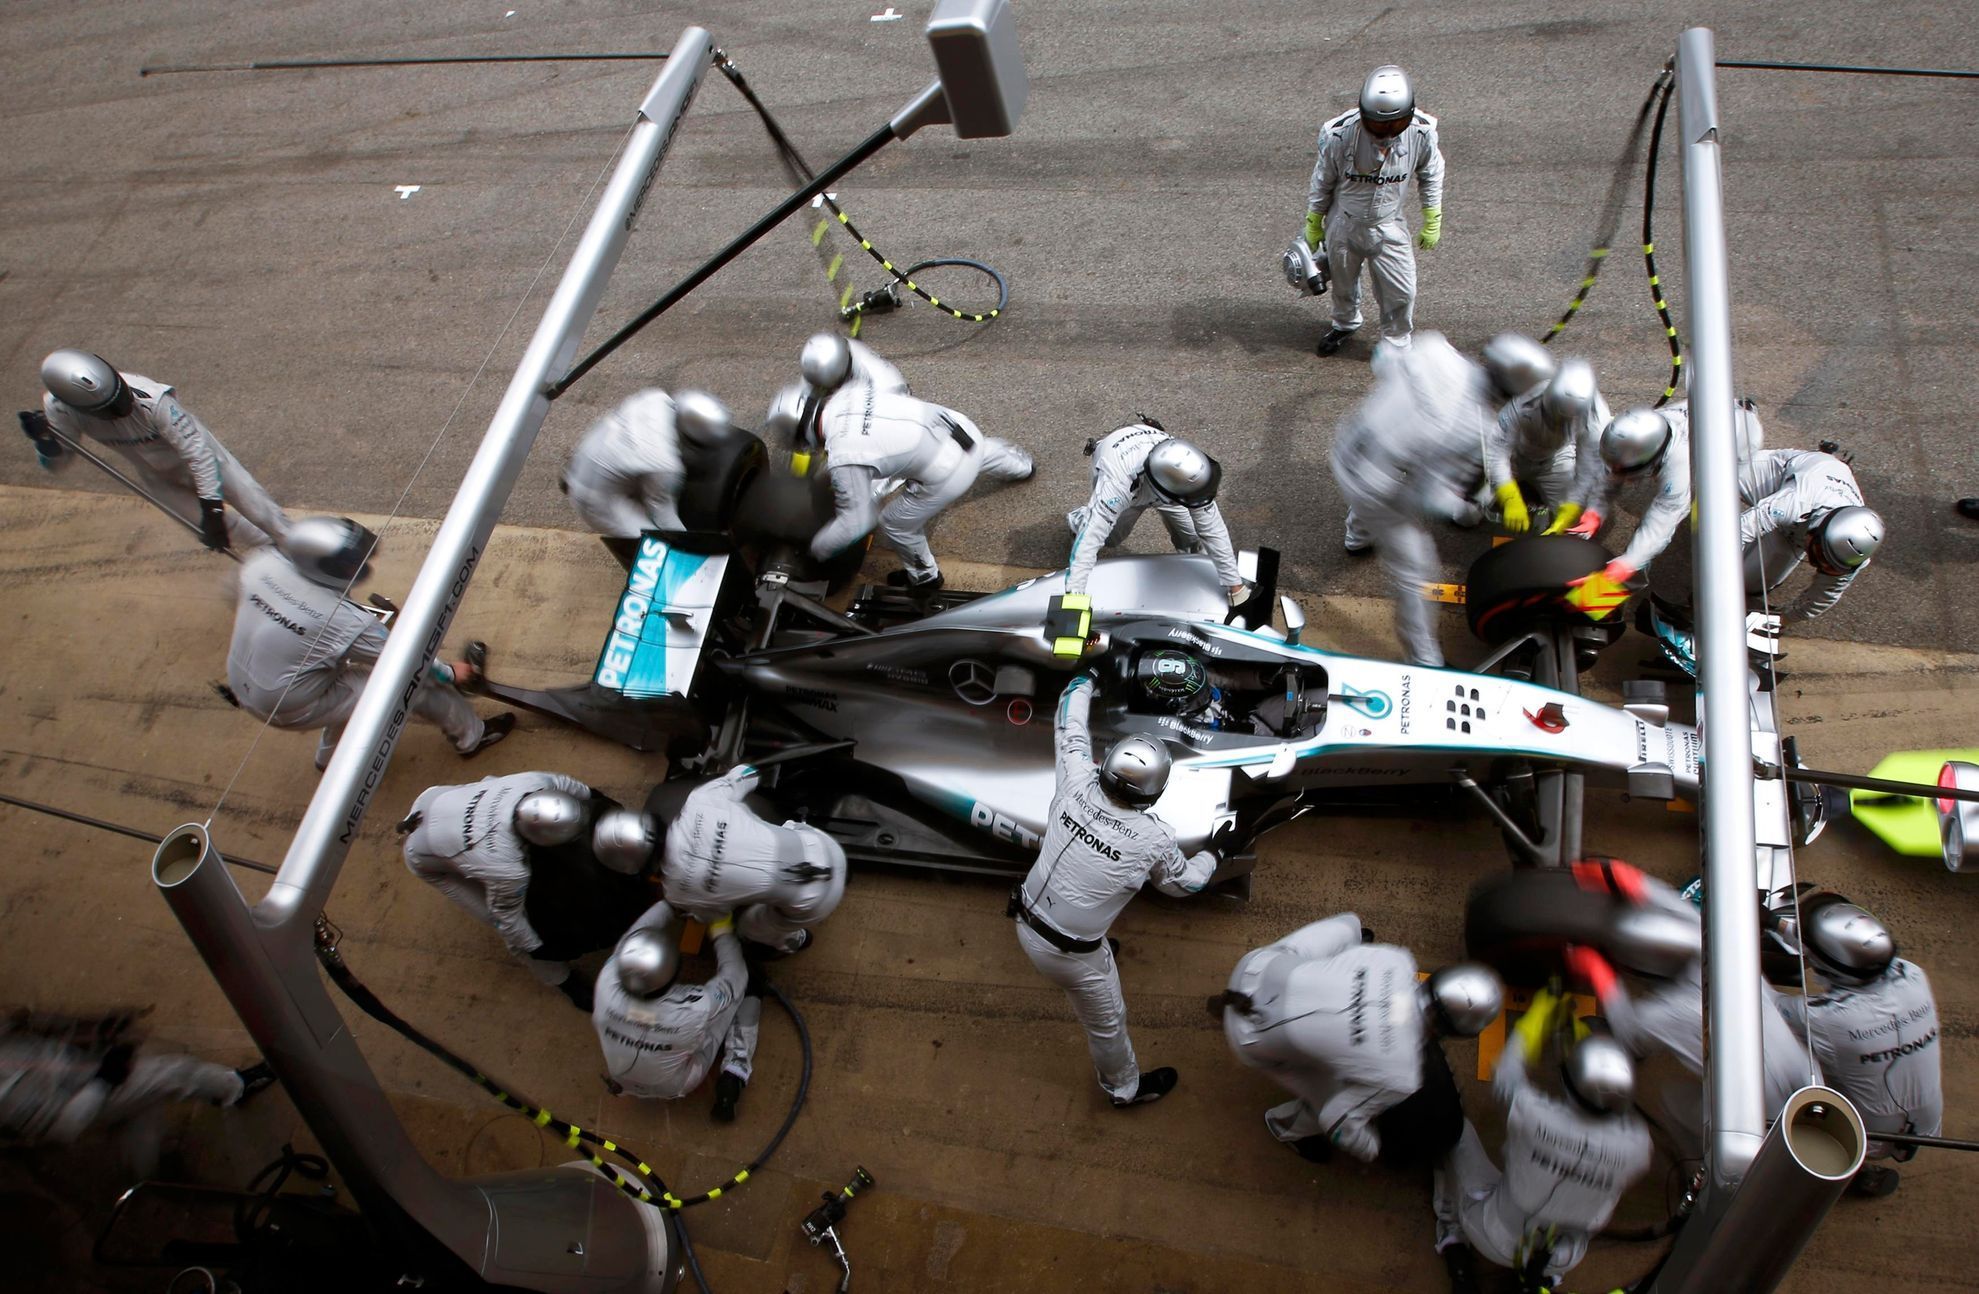 Crew members of Mercedes Formula One driver Rosberg of Germany service the car at pit stop during the Spanish F1 Grand Prix at the Barcelona-Catalunya Circuit in Montmelo